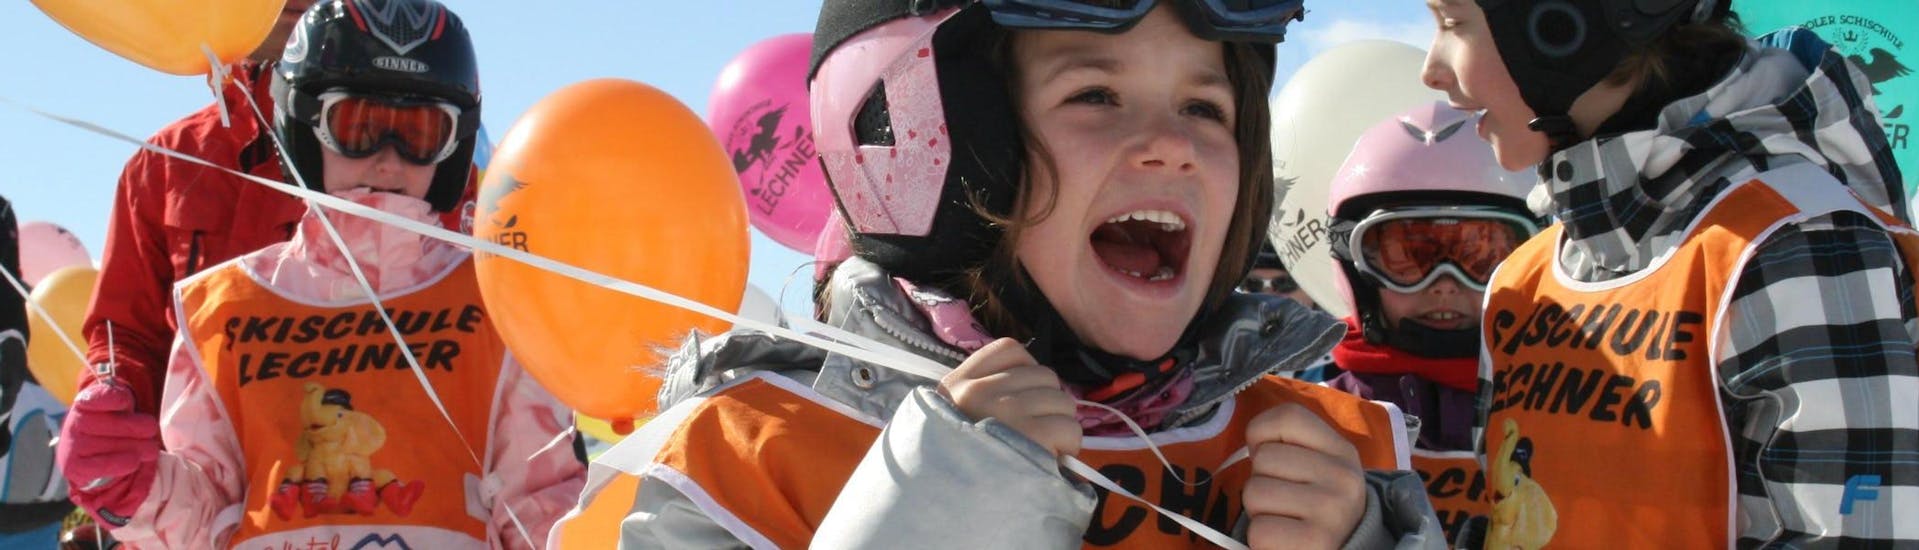 Several children taking part in the Kids Ski Lessons for Beginners (5-14 years) organised by the ski school Skischule Lechner are holding balloons with the ski school's logo printed on them.